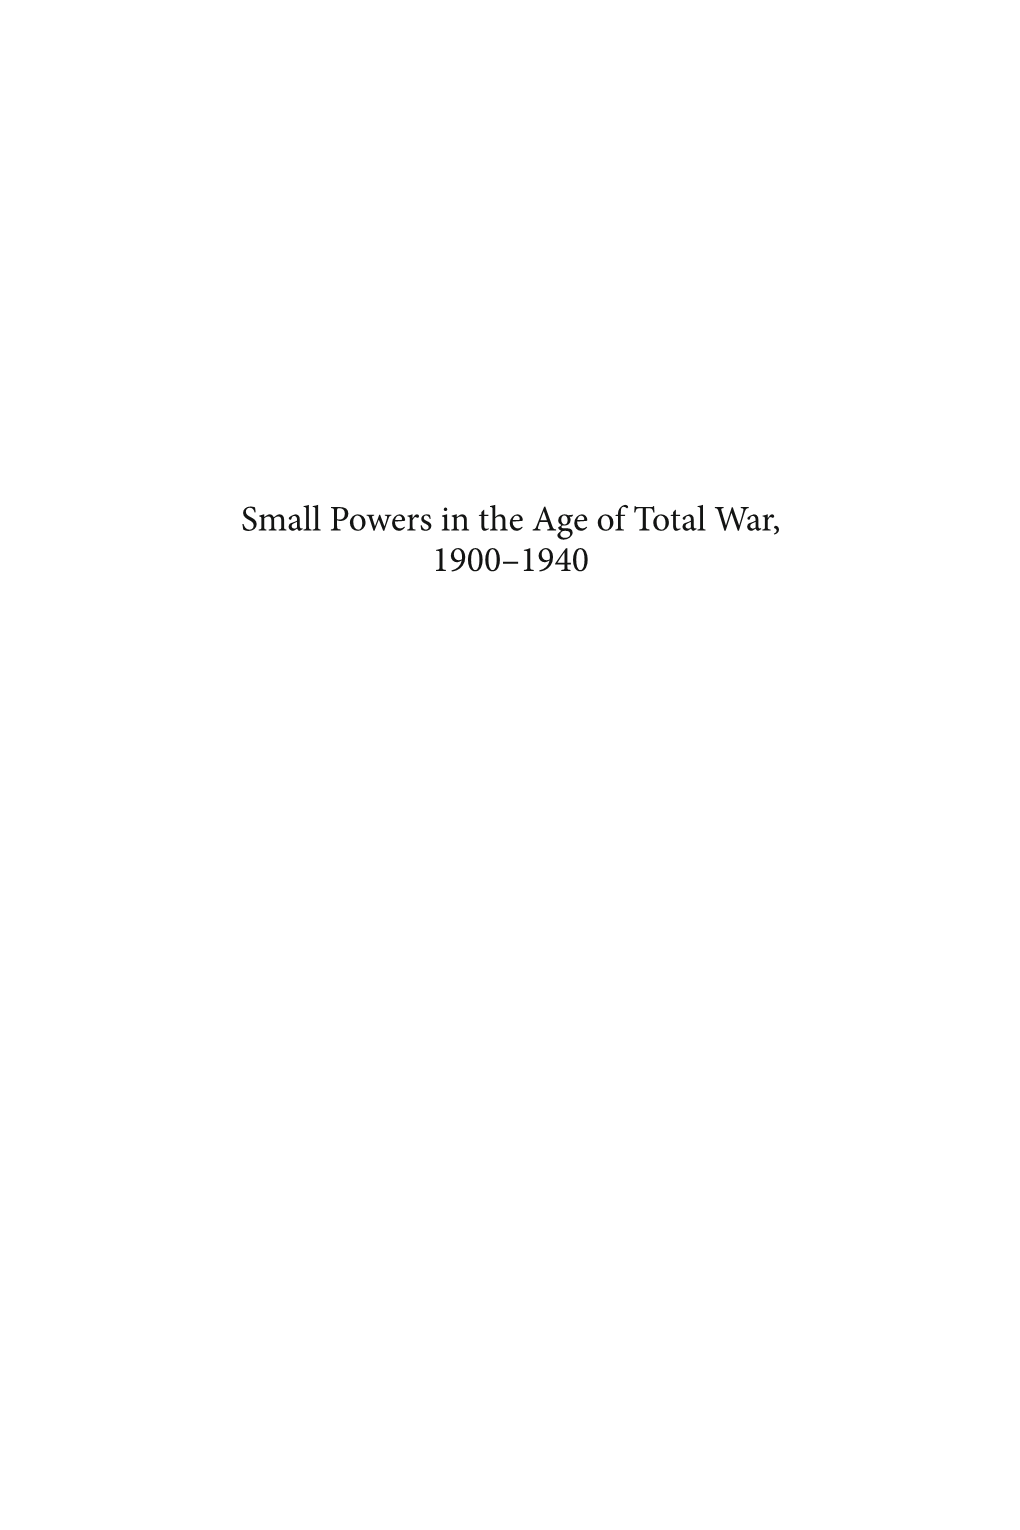 Small Powers in the Age of Total War, 1900–1940 History of Warfare